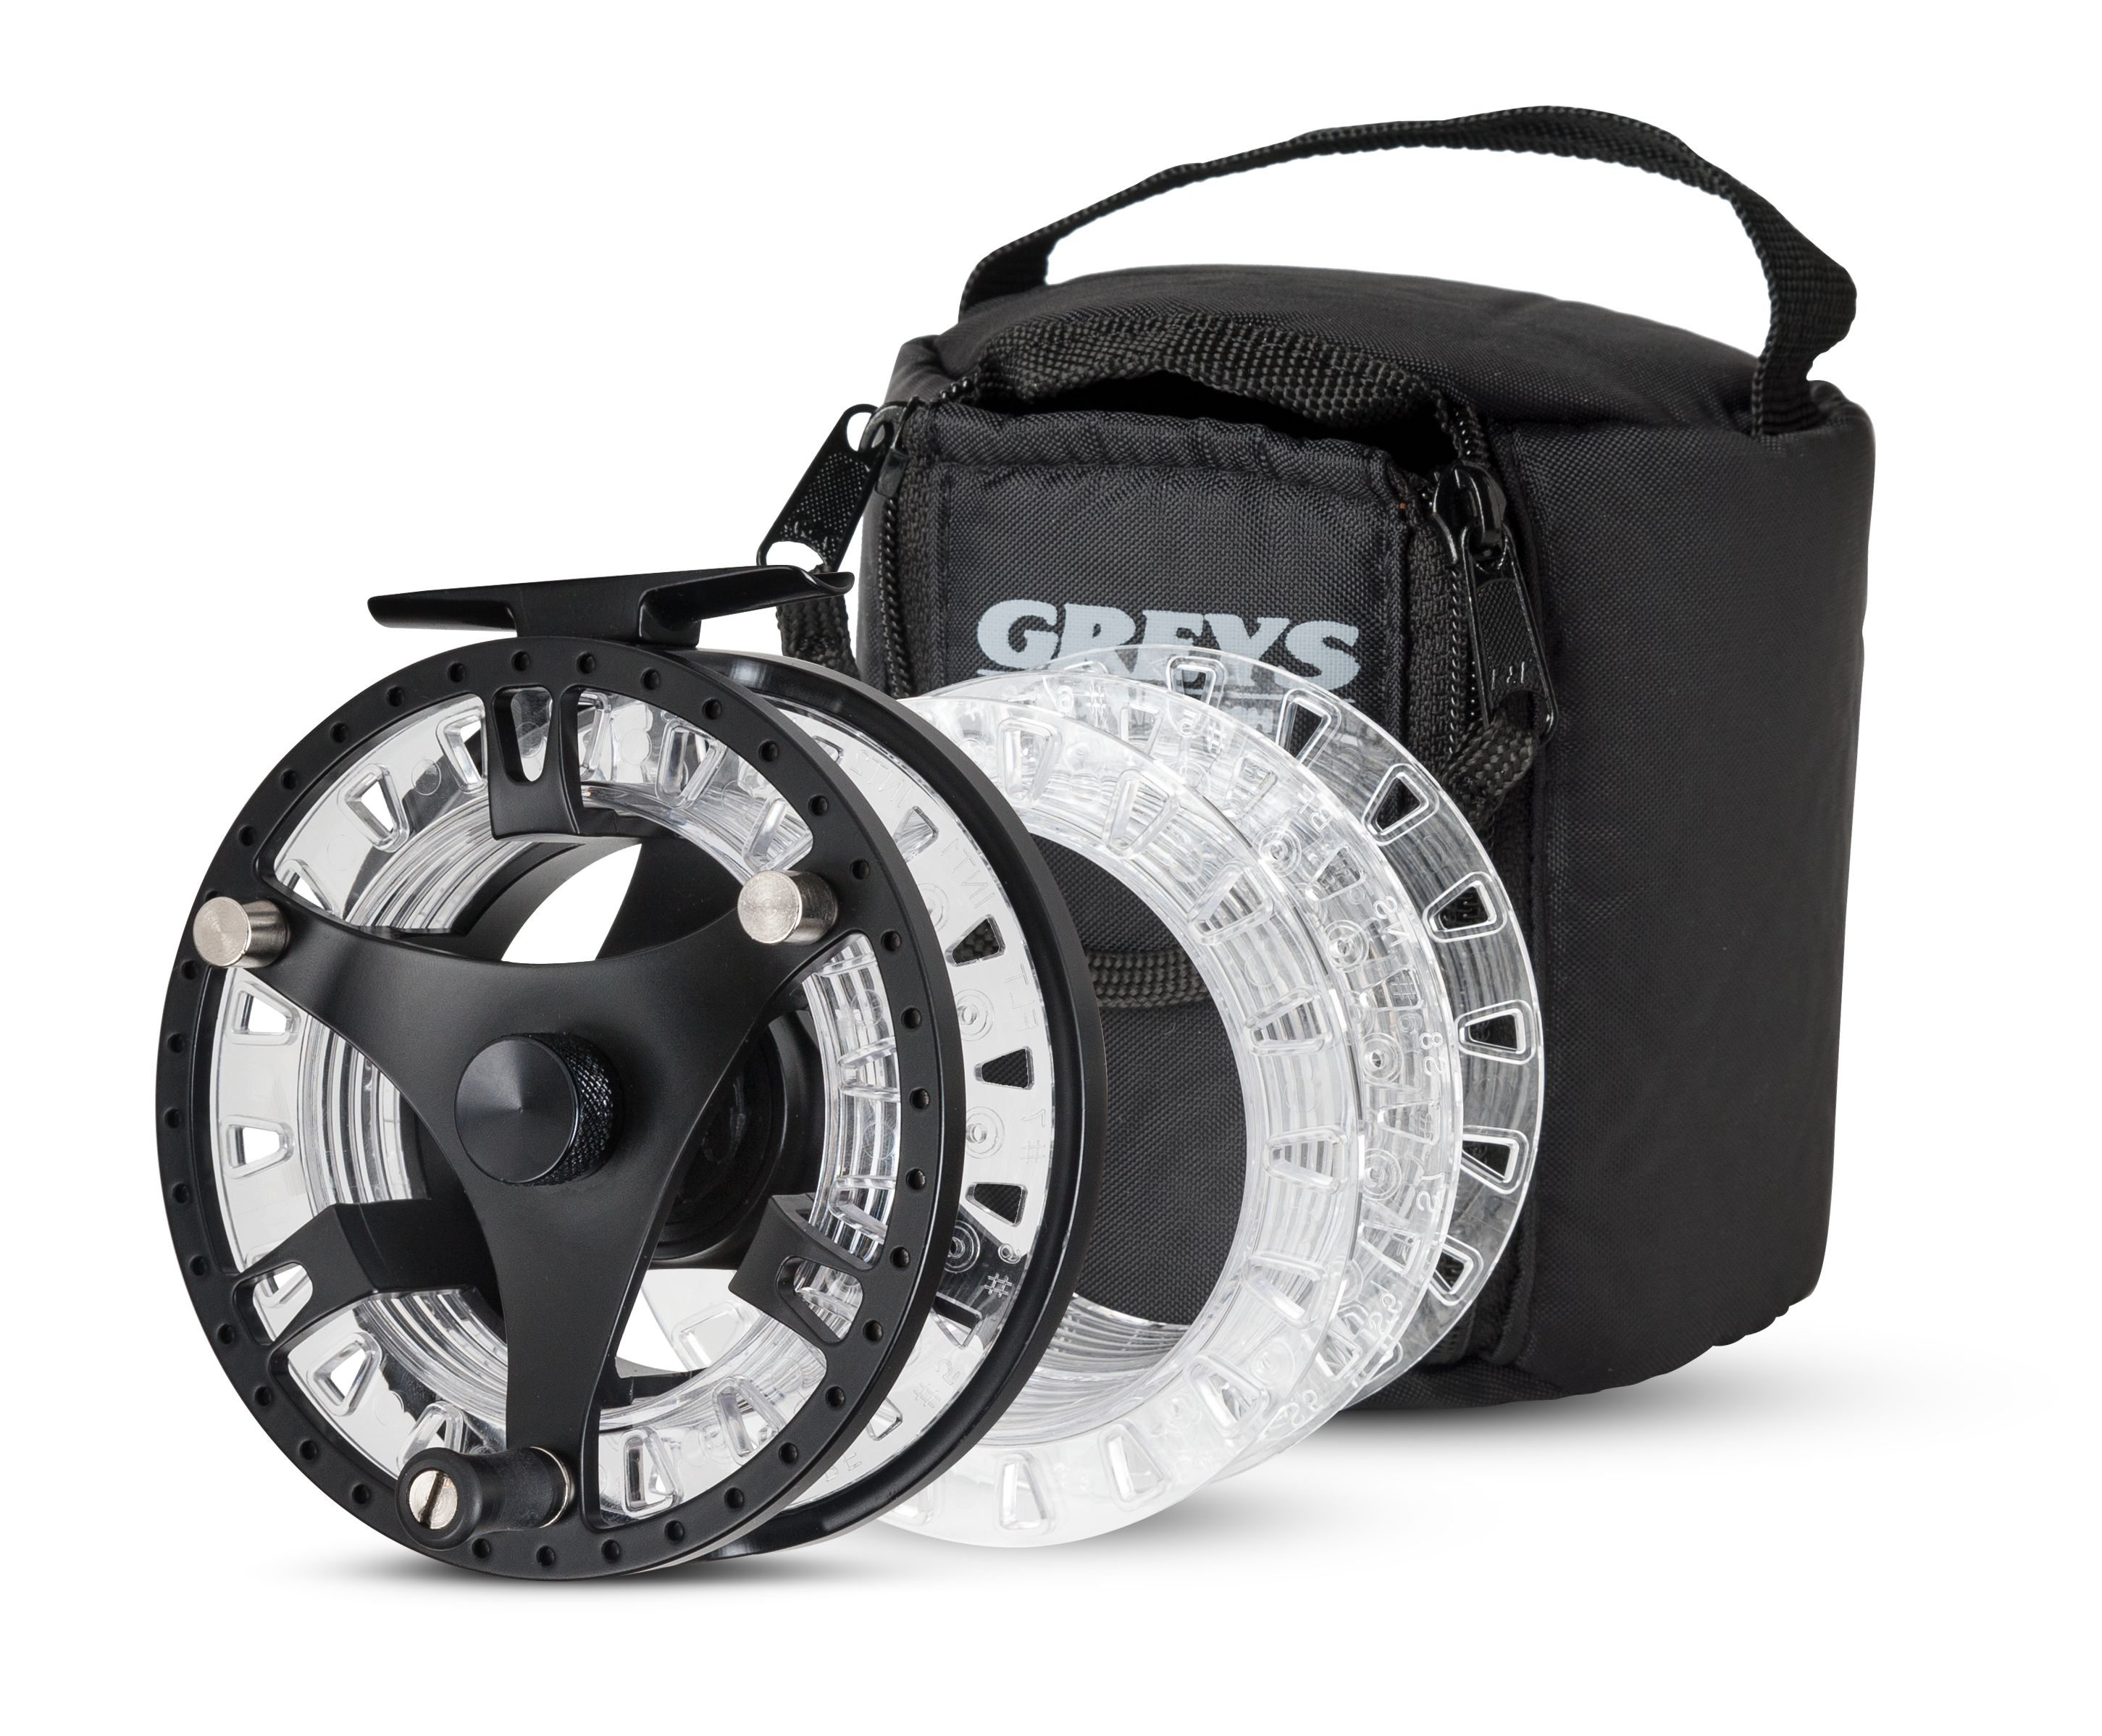 greys gts 500 Today's Deals - OFF 68%